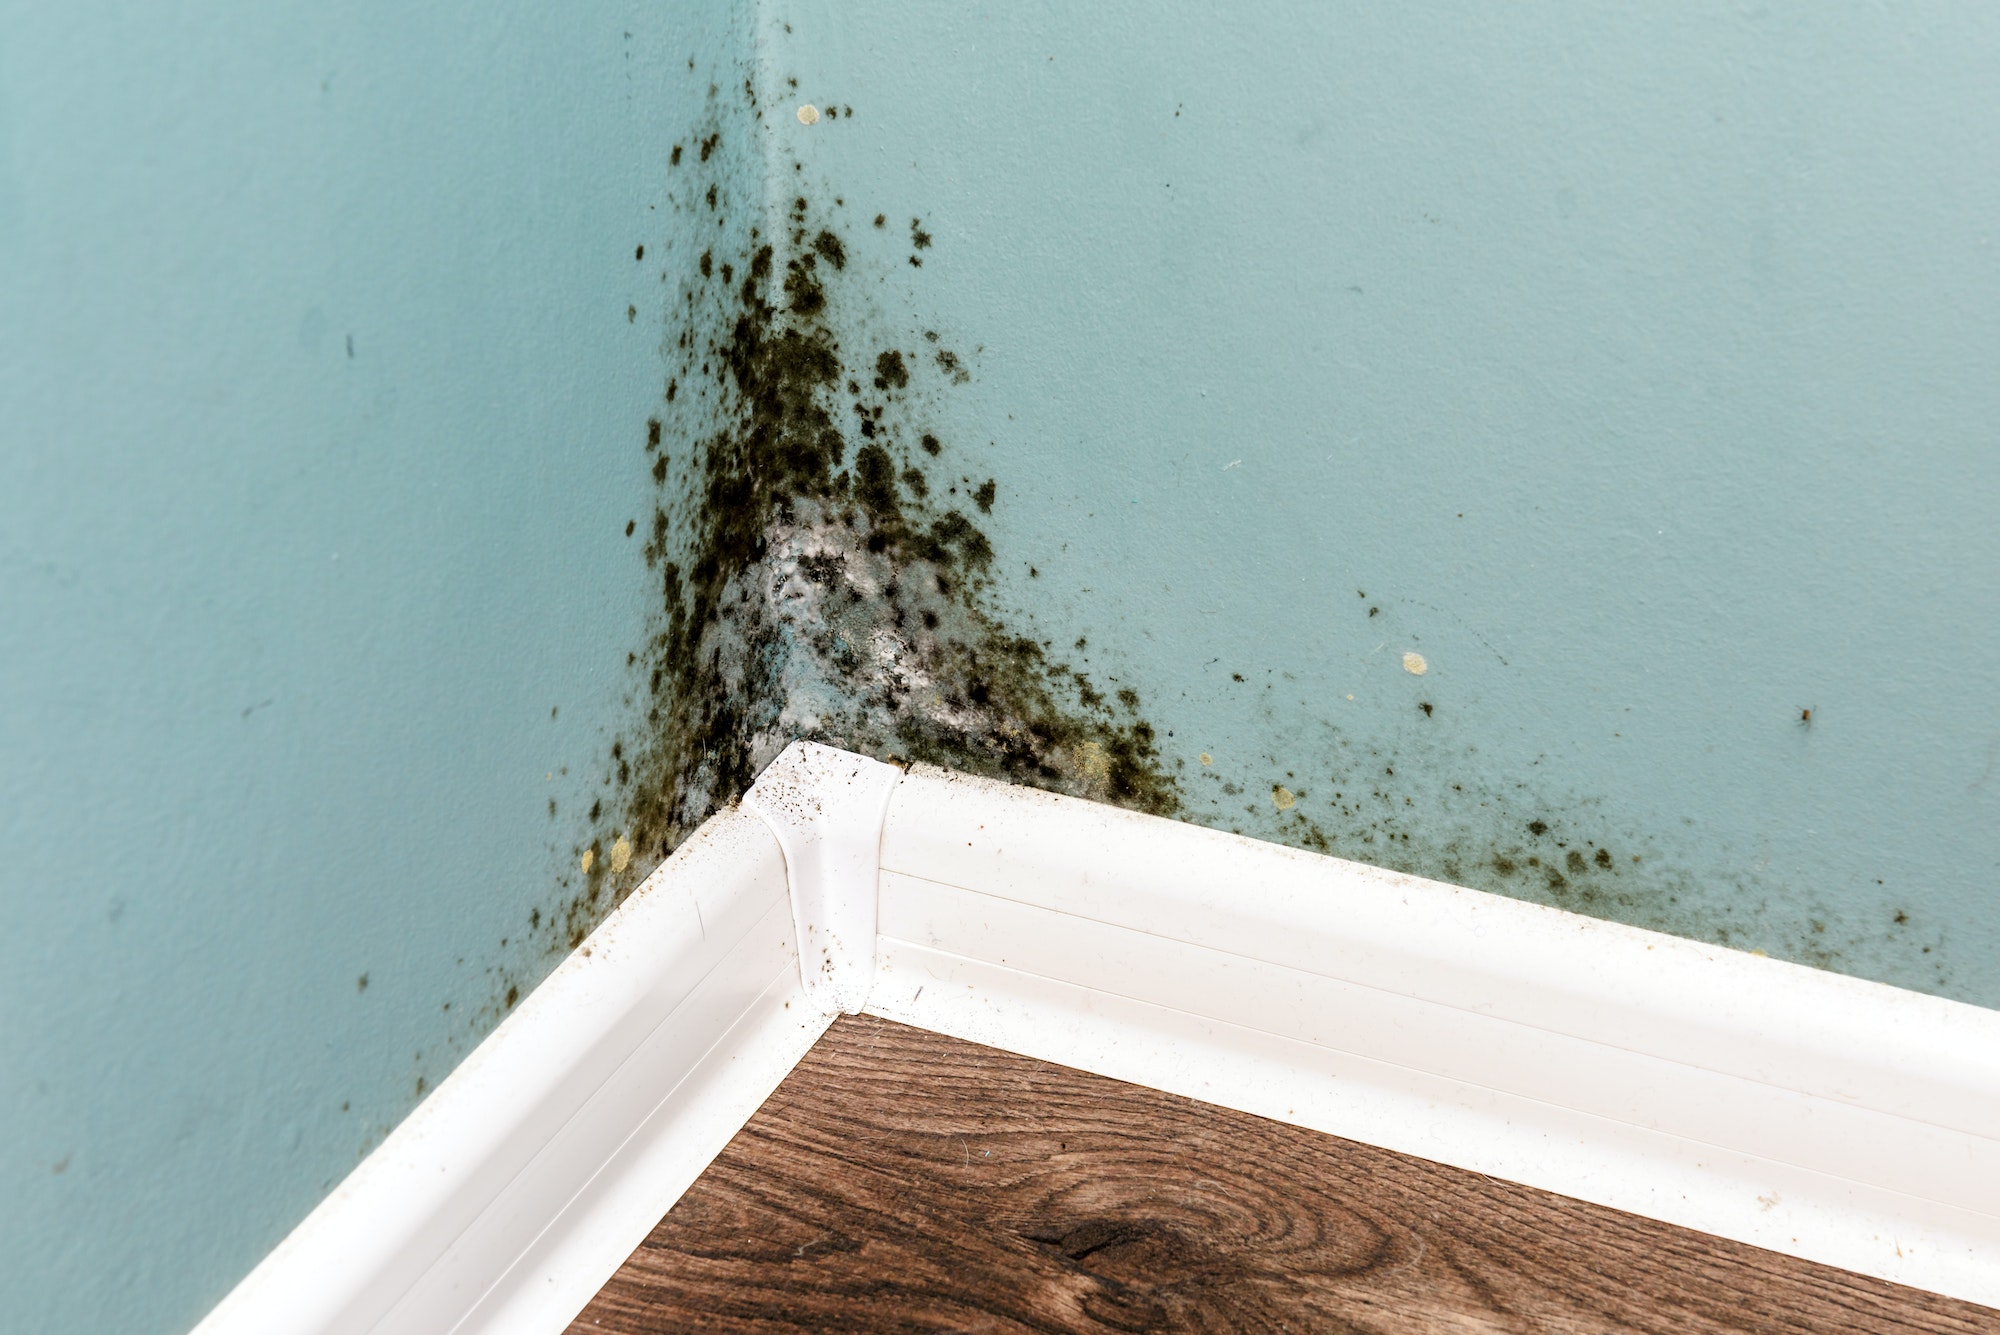 Black mold on wall closeup. Call us at 239-200-2474 for fast mold cleaning in Tampa, Saint Petersburg, Naples and Sarasota, FL